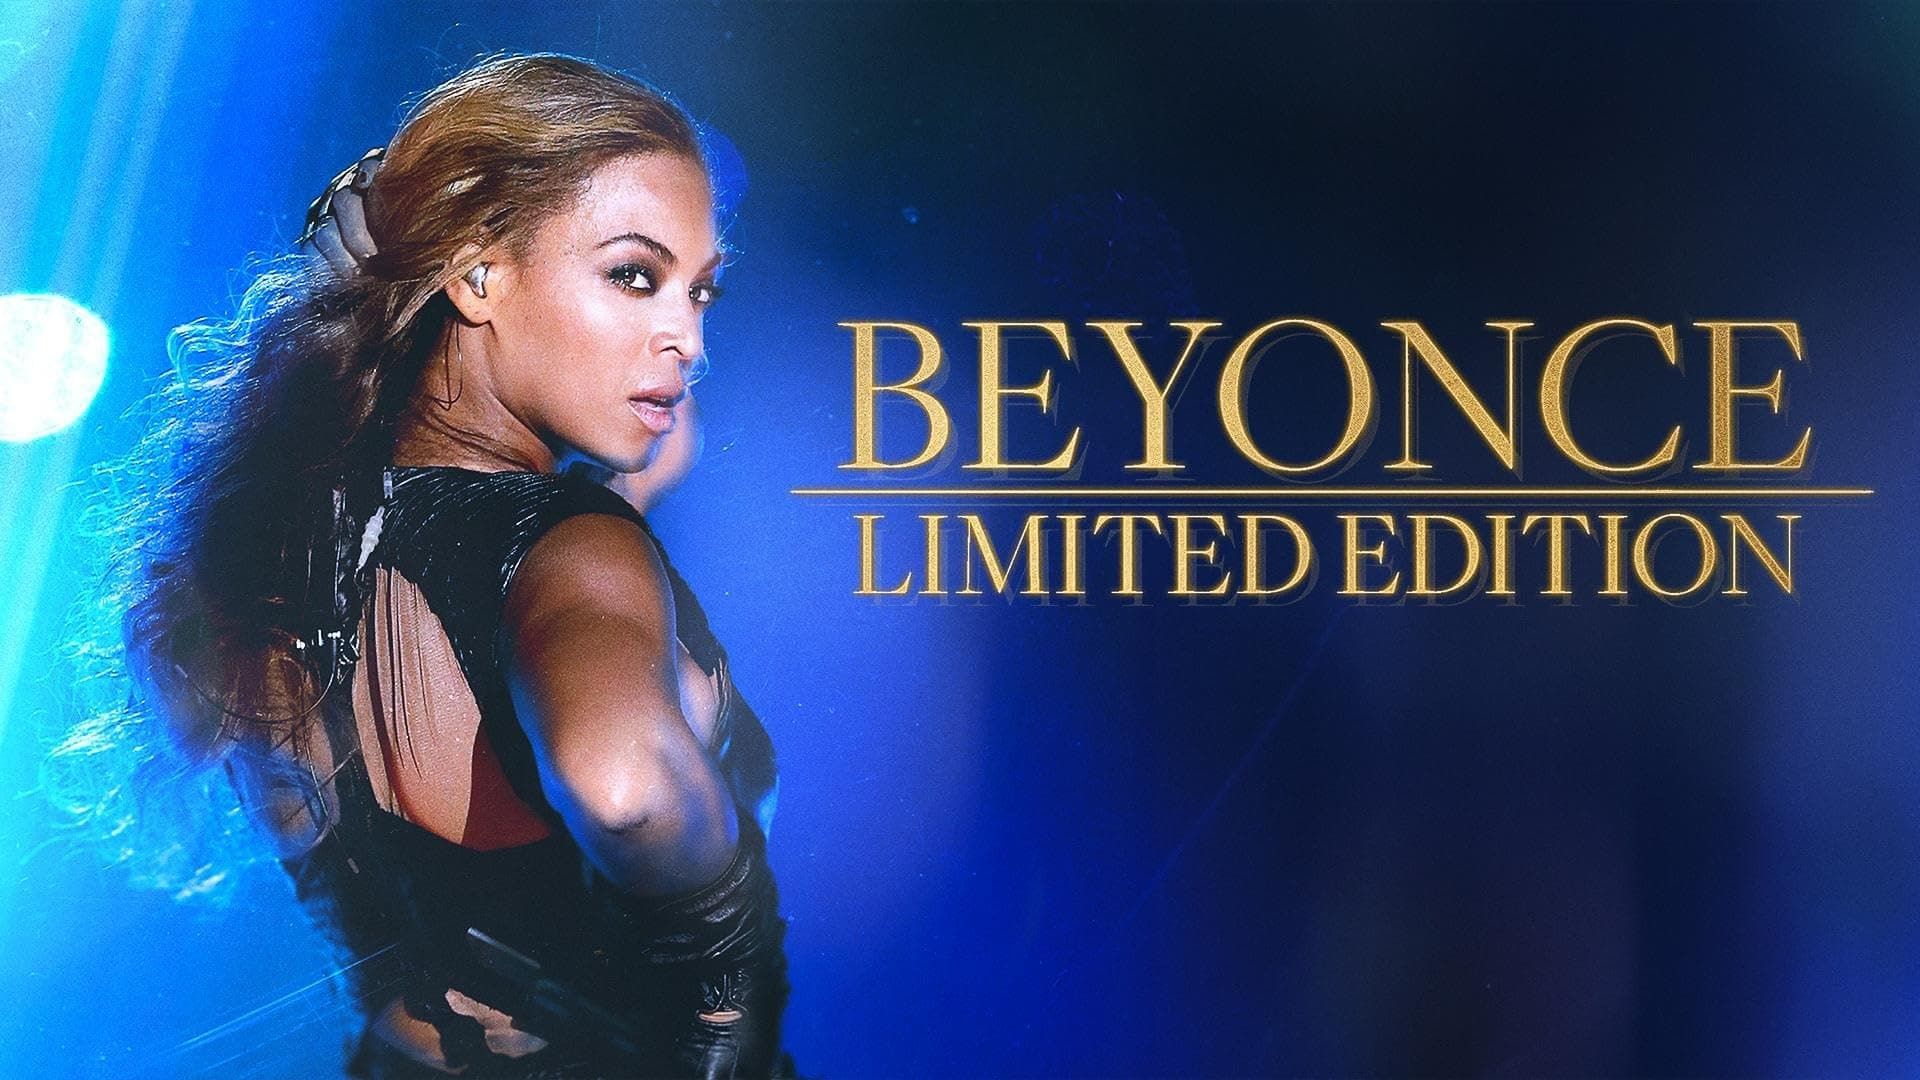 Beyonce: Limited Edition background